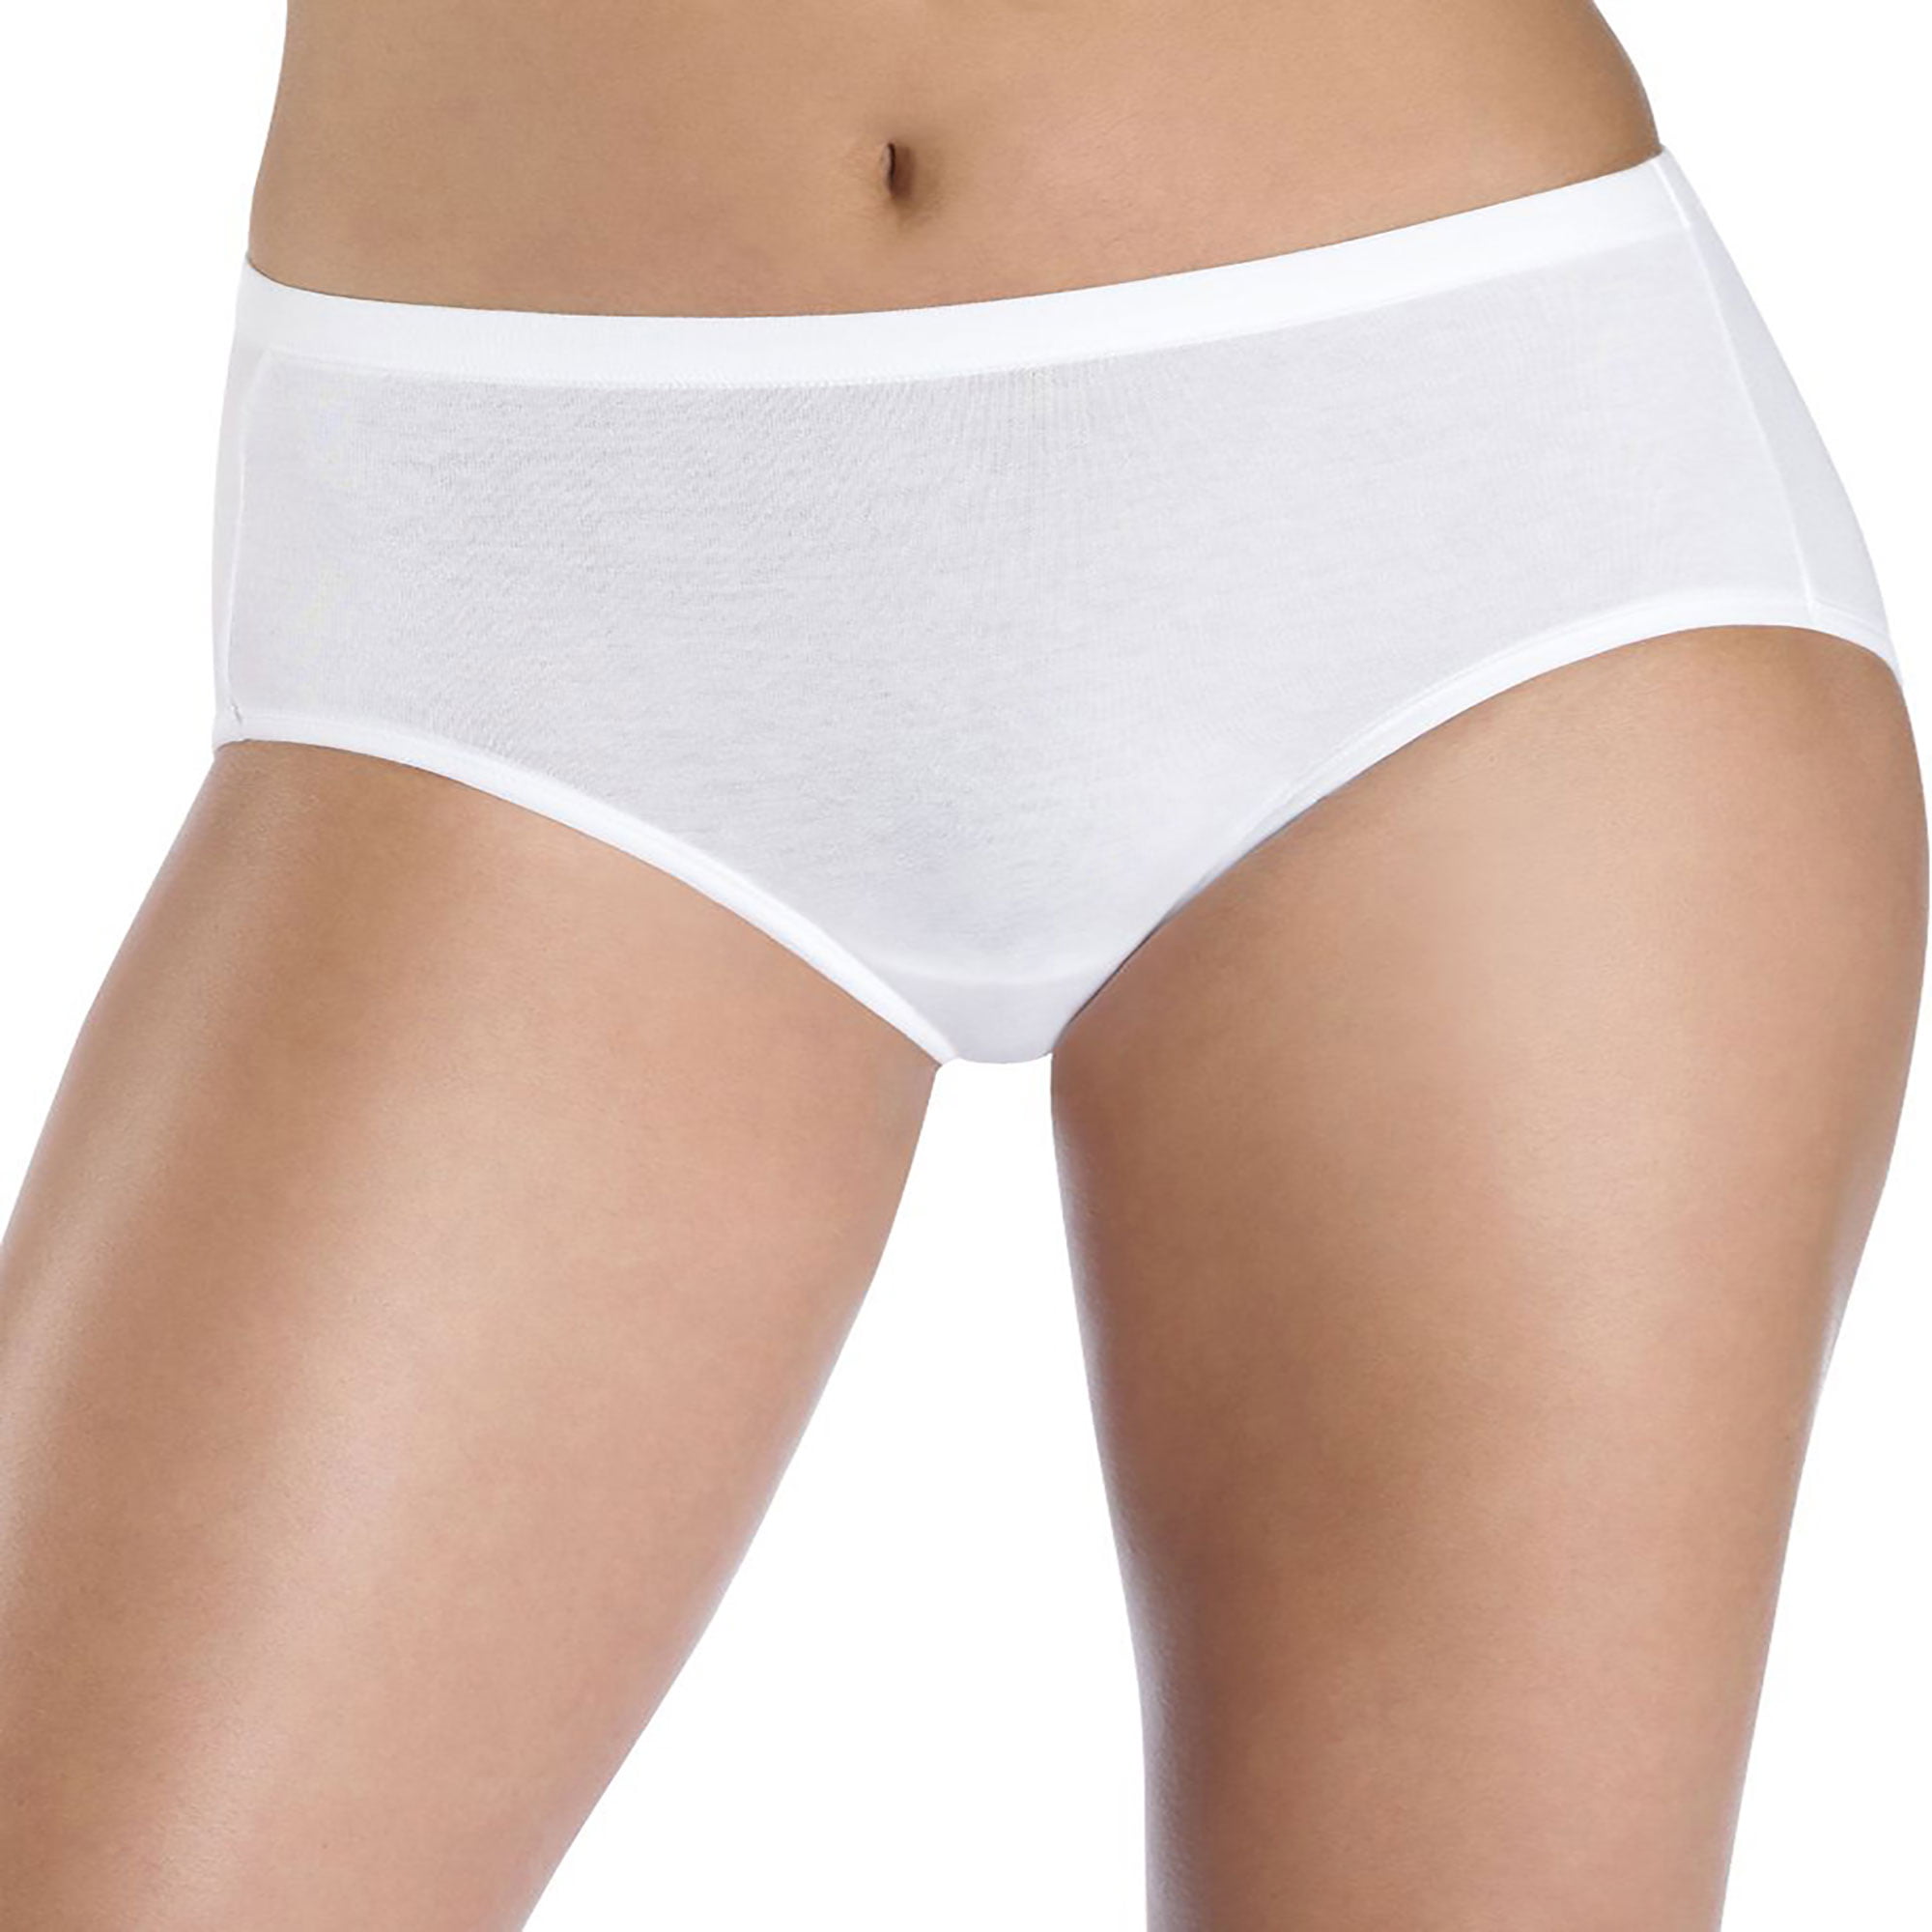 ET39AS-Hanes Women's Cotton Stretch Low Rise Brief with